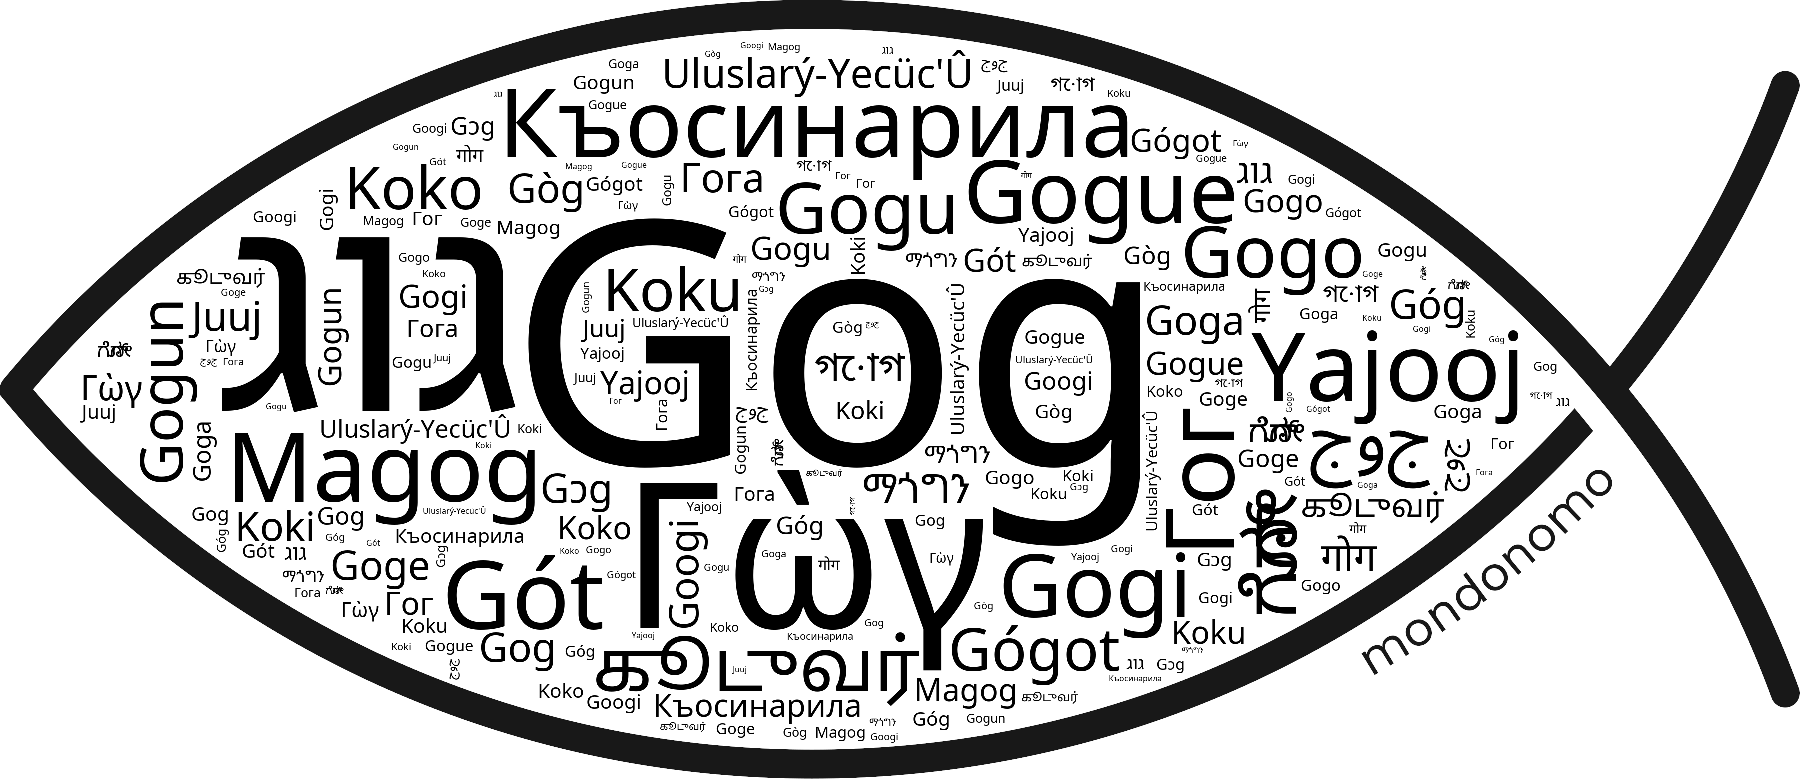 Name Gog in the world's Bibles